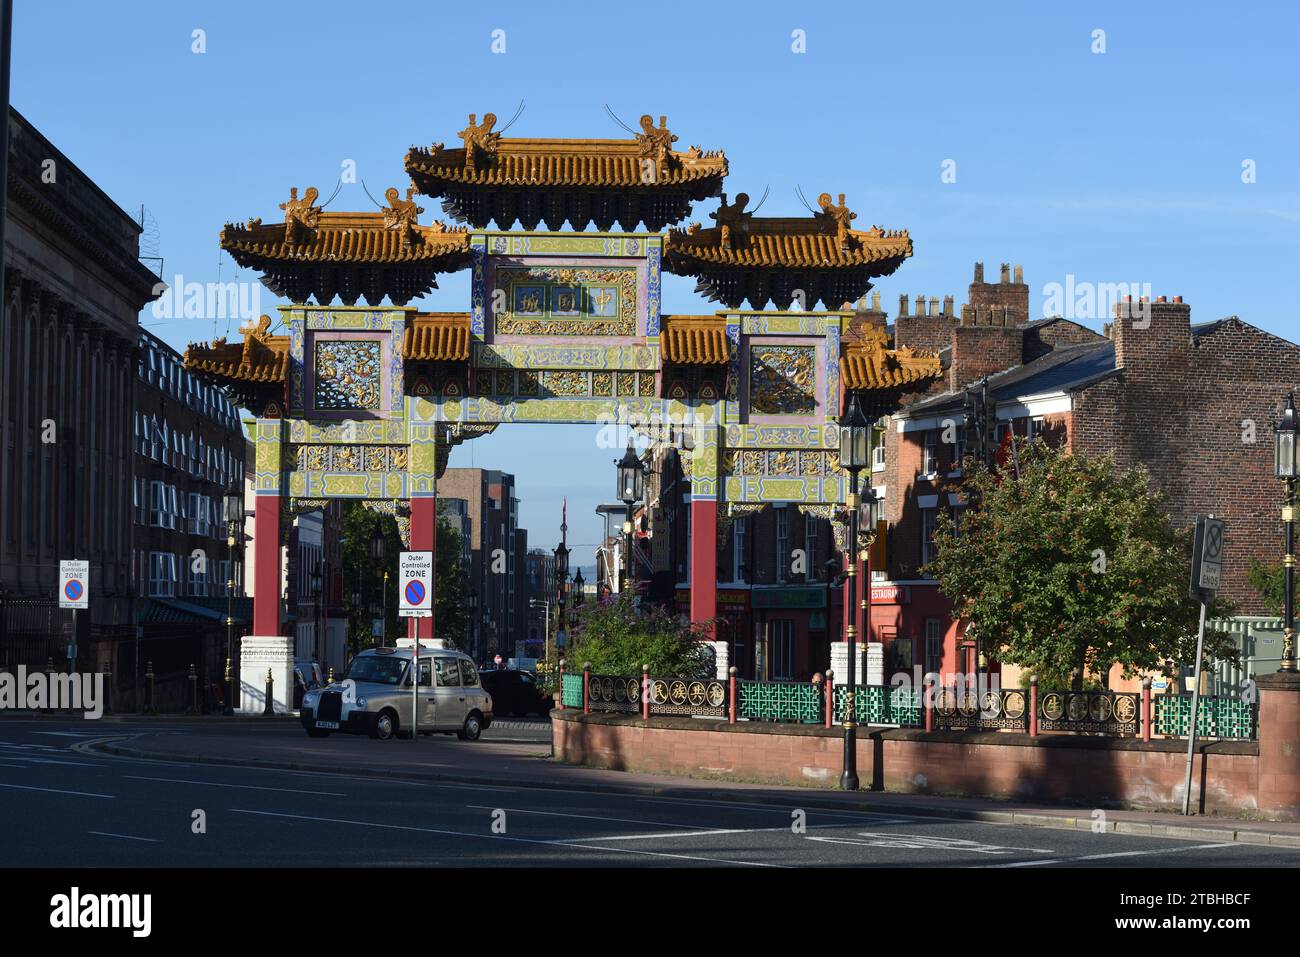 Chinese Arch, Archway, Ornamental Gate, Gateway or Entrance, known as a Paifang or Pailou, built 1999-2000, to Chinatown on Nelson Street Liverpool Stock Photo